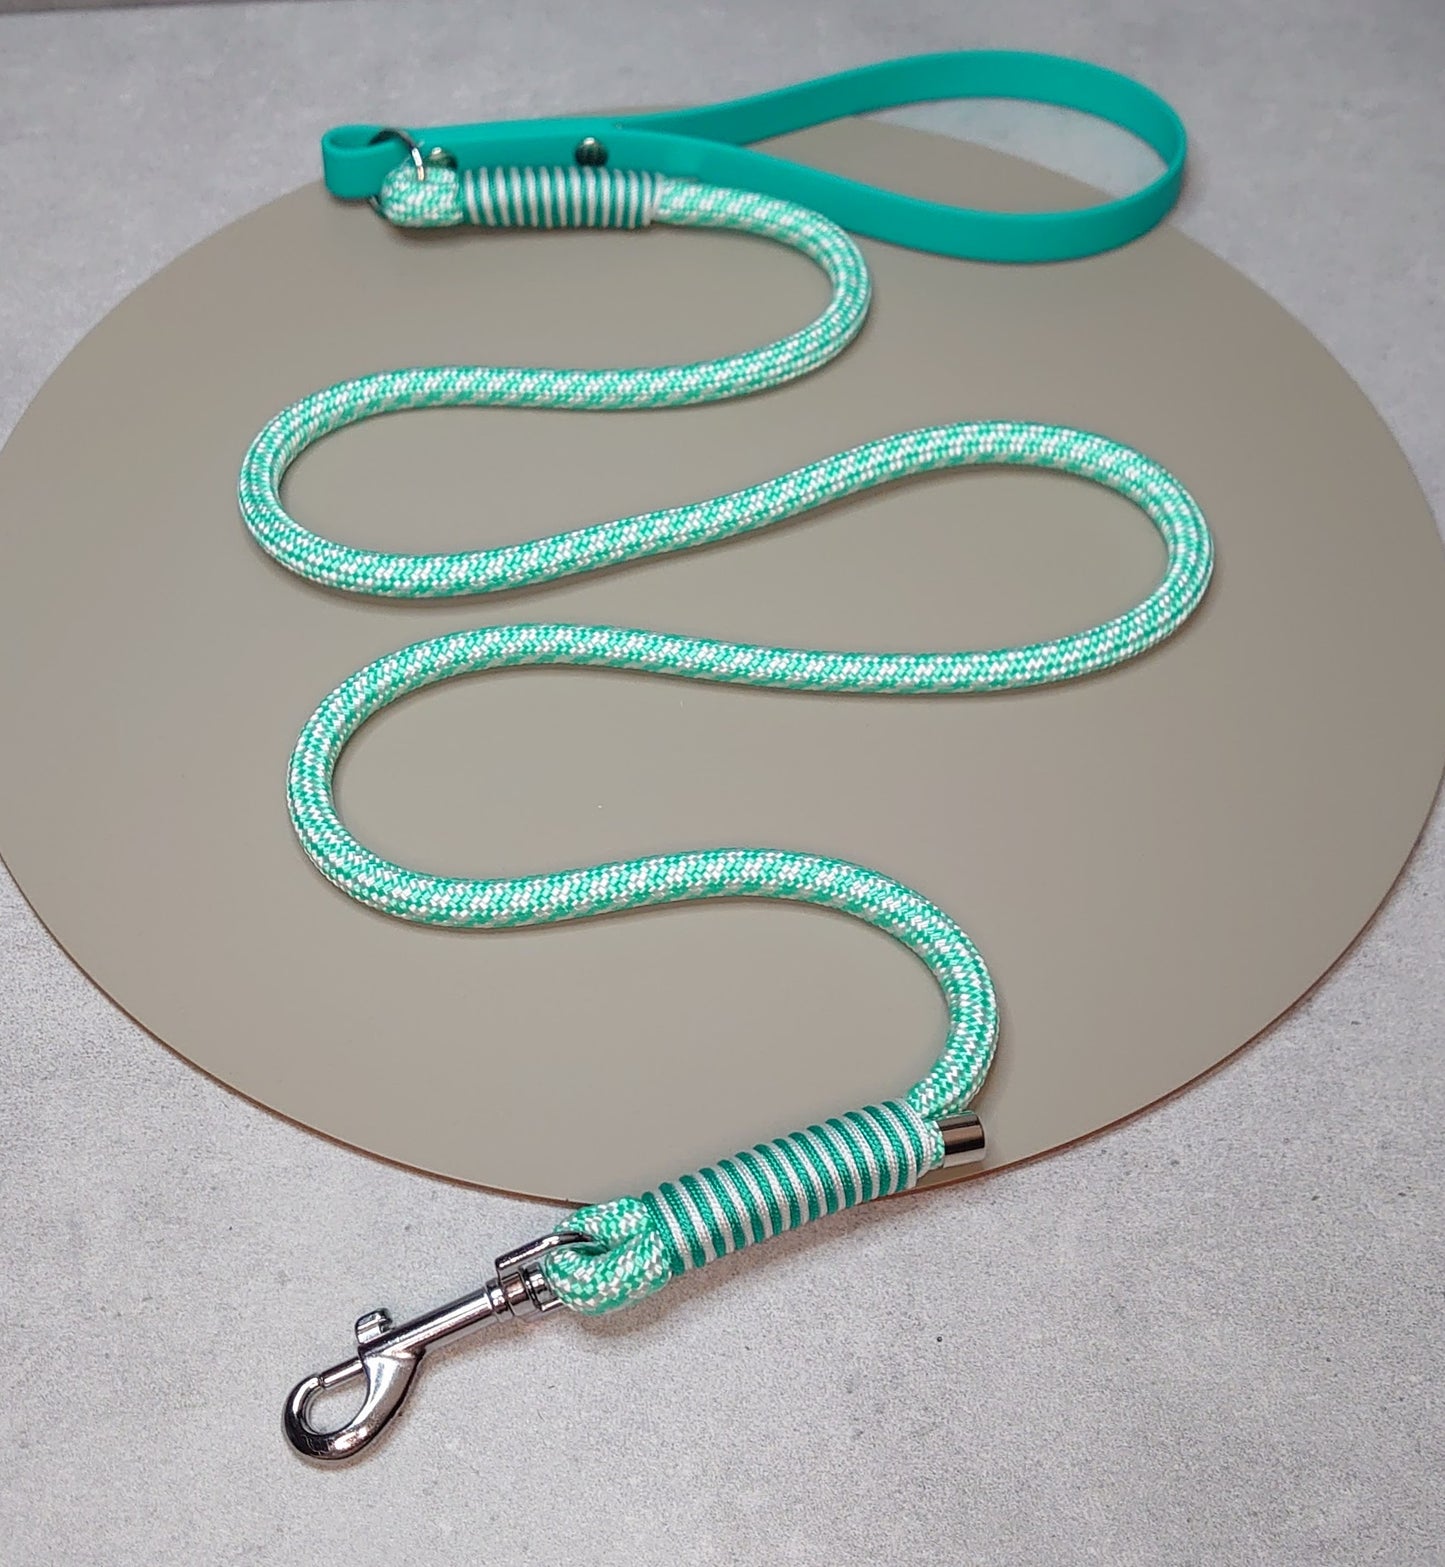 Rope lead with biothane handle - Design your own